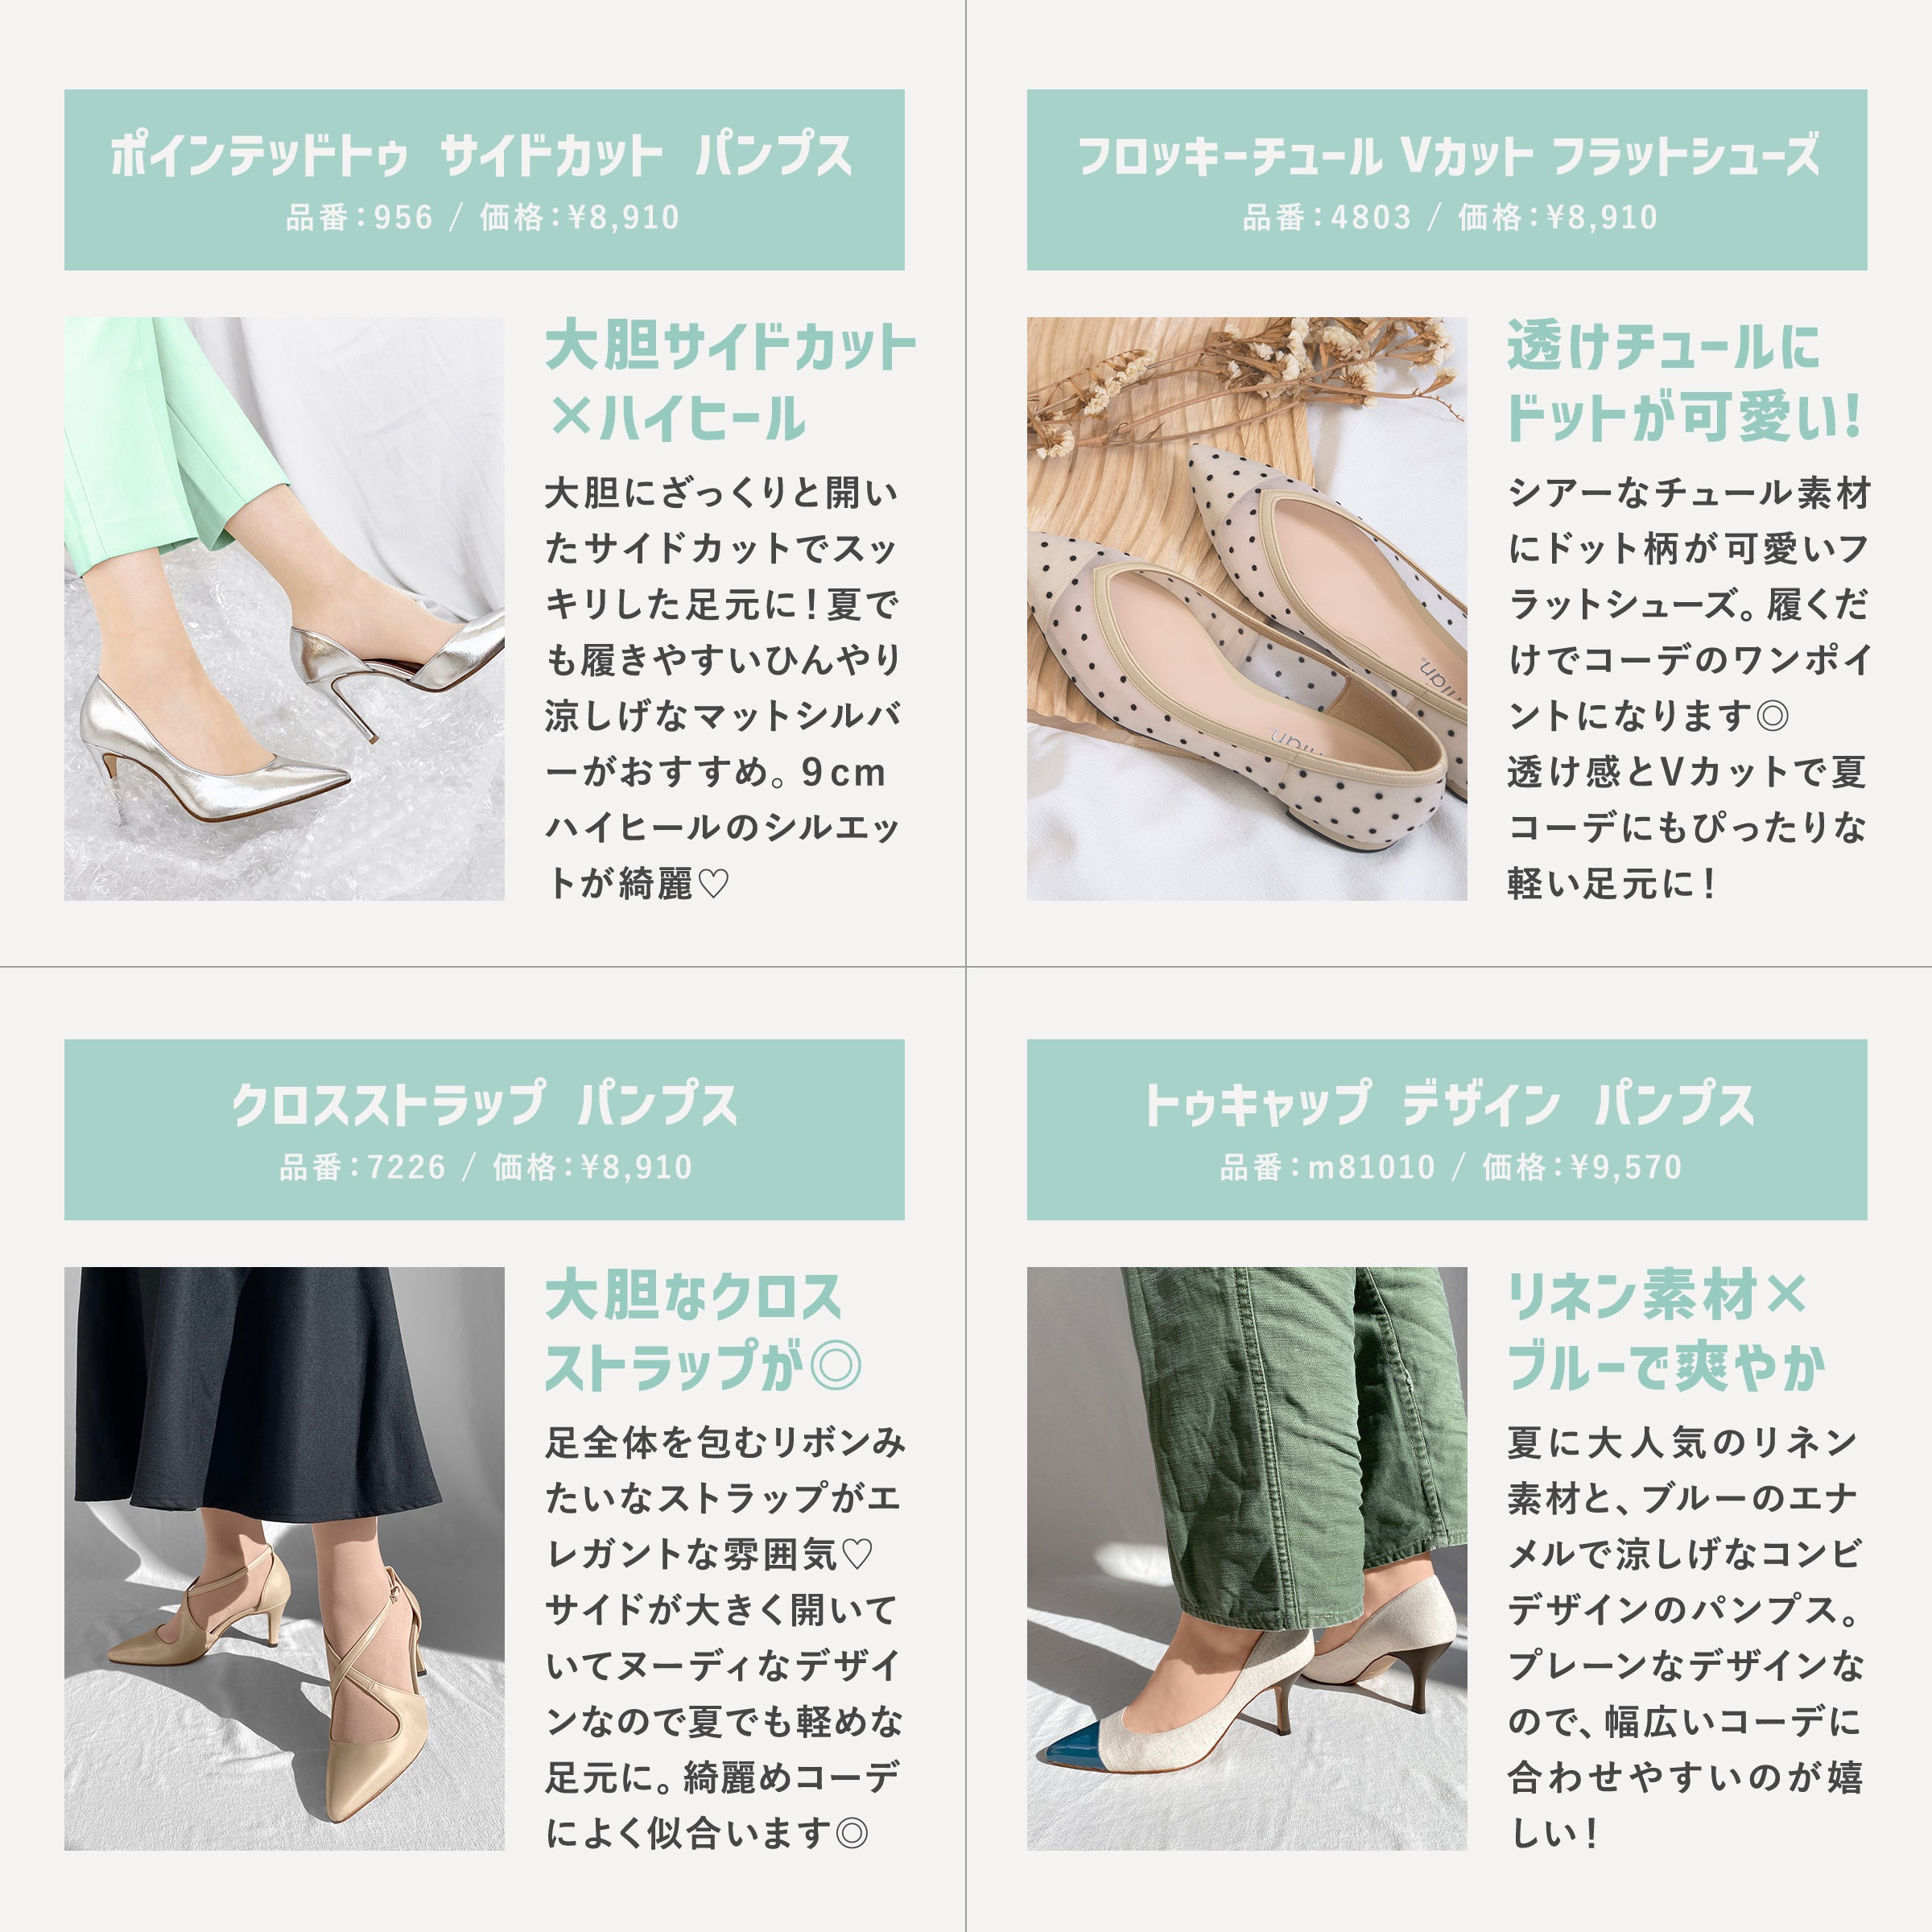 It's not too hot even in summer! Pumps/flat shoes